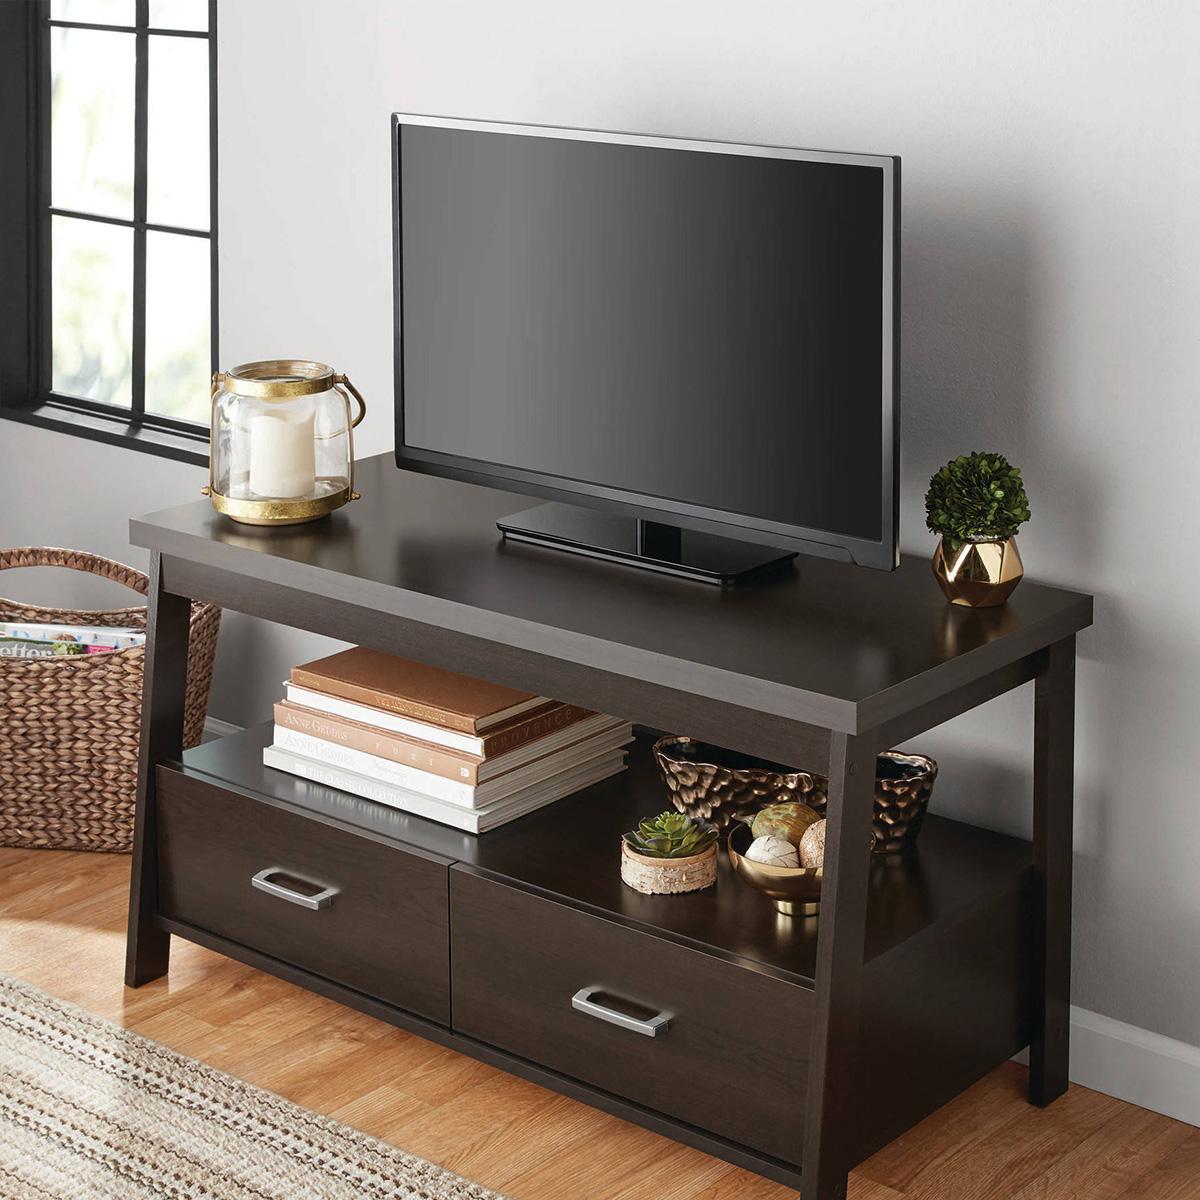 Twin Star Home Stanton Ridge TV Stand for $99.99 Shipped